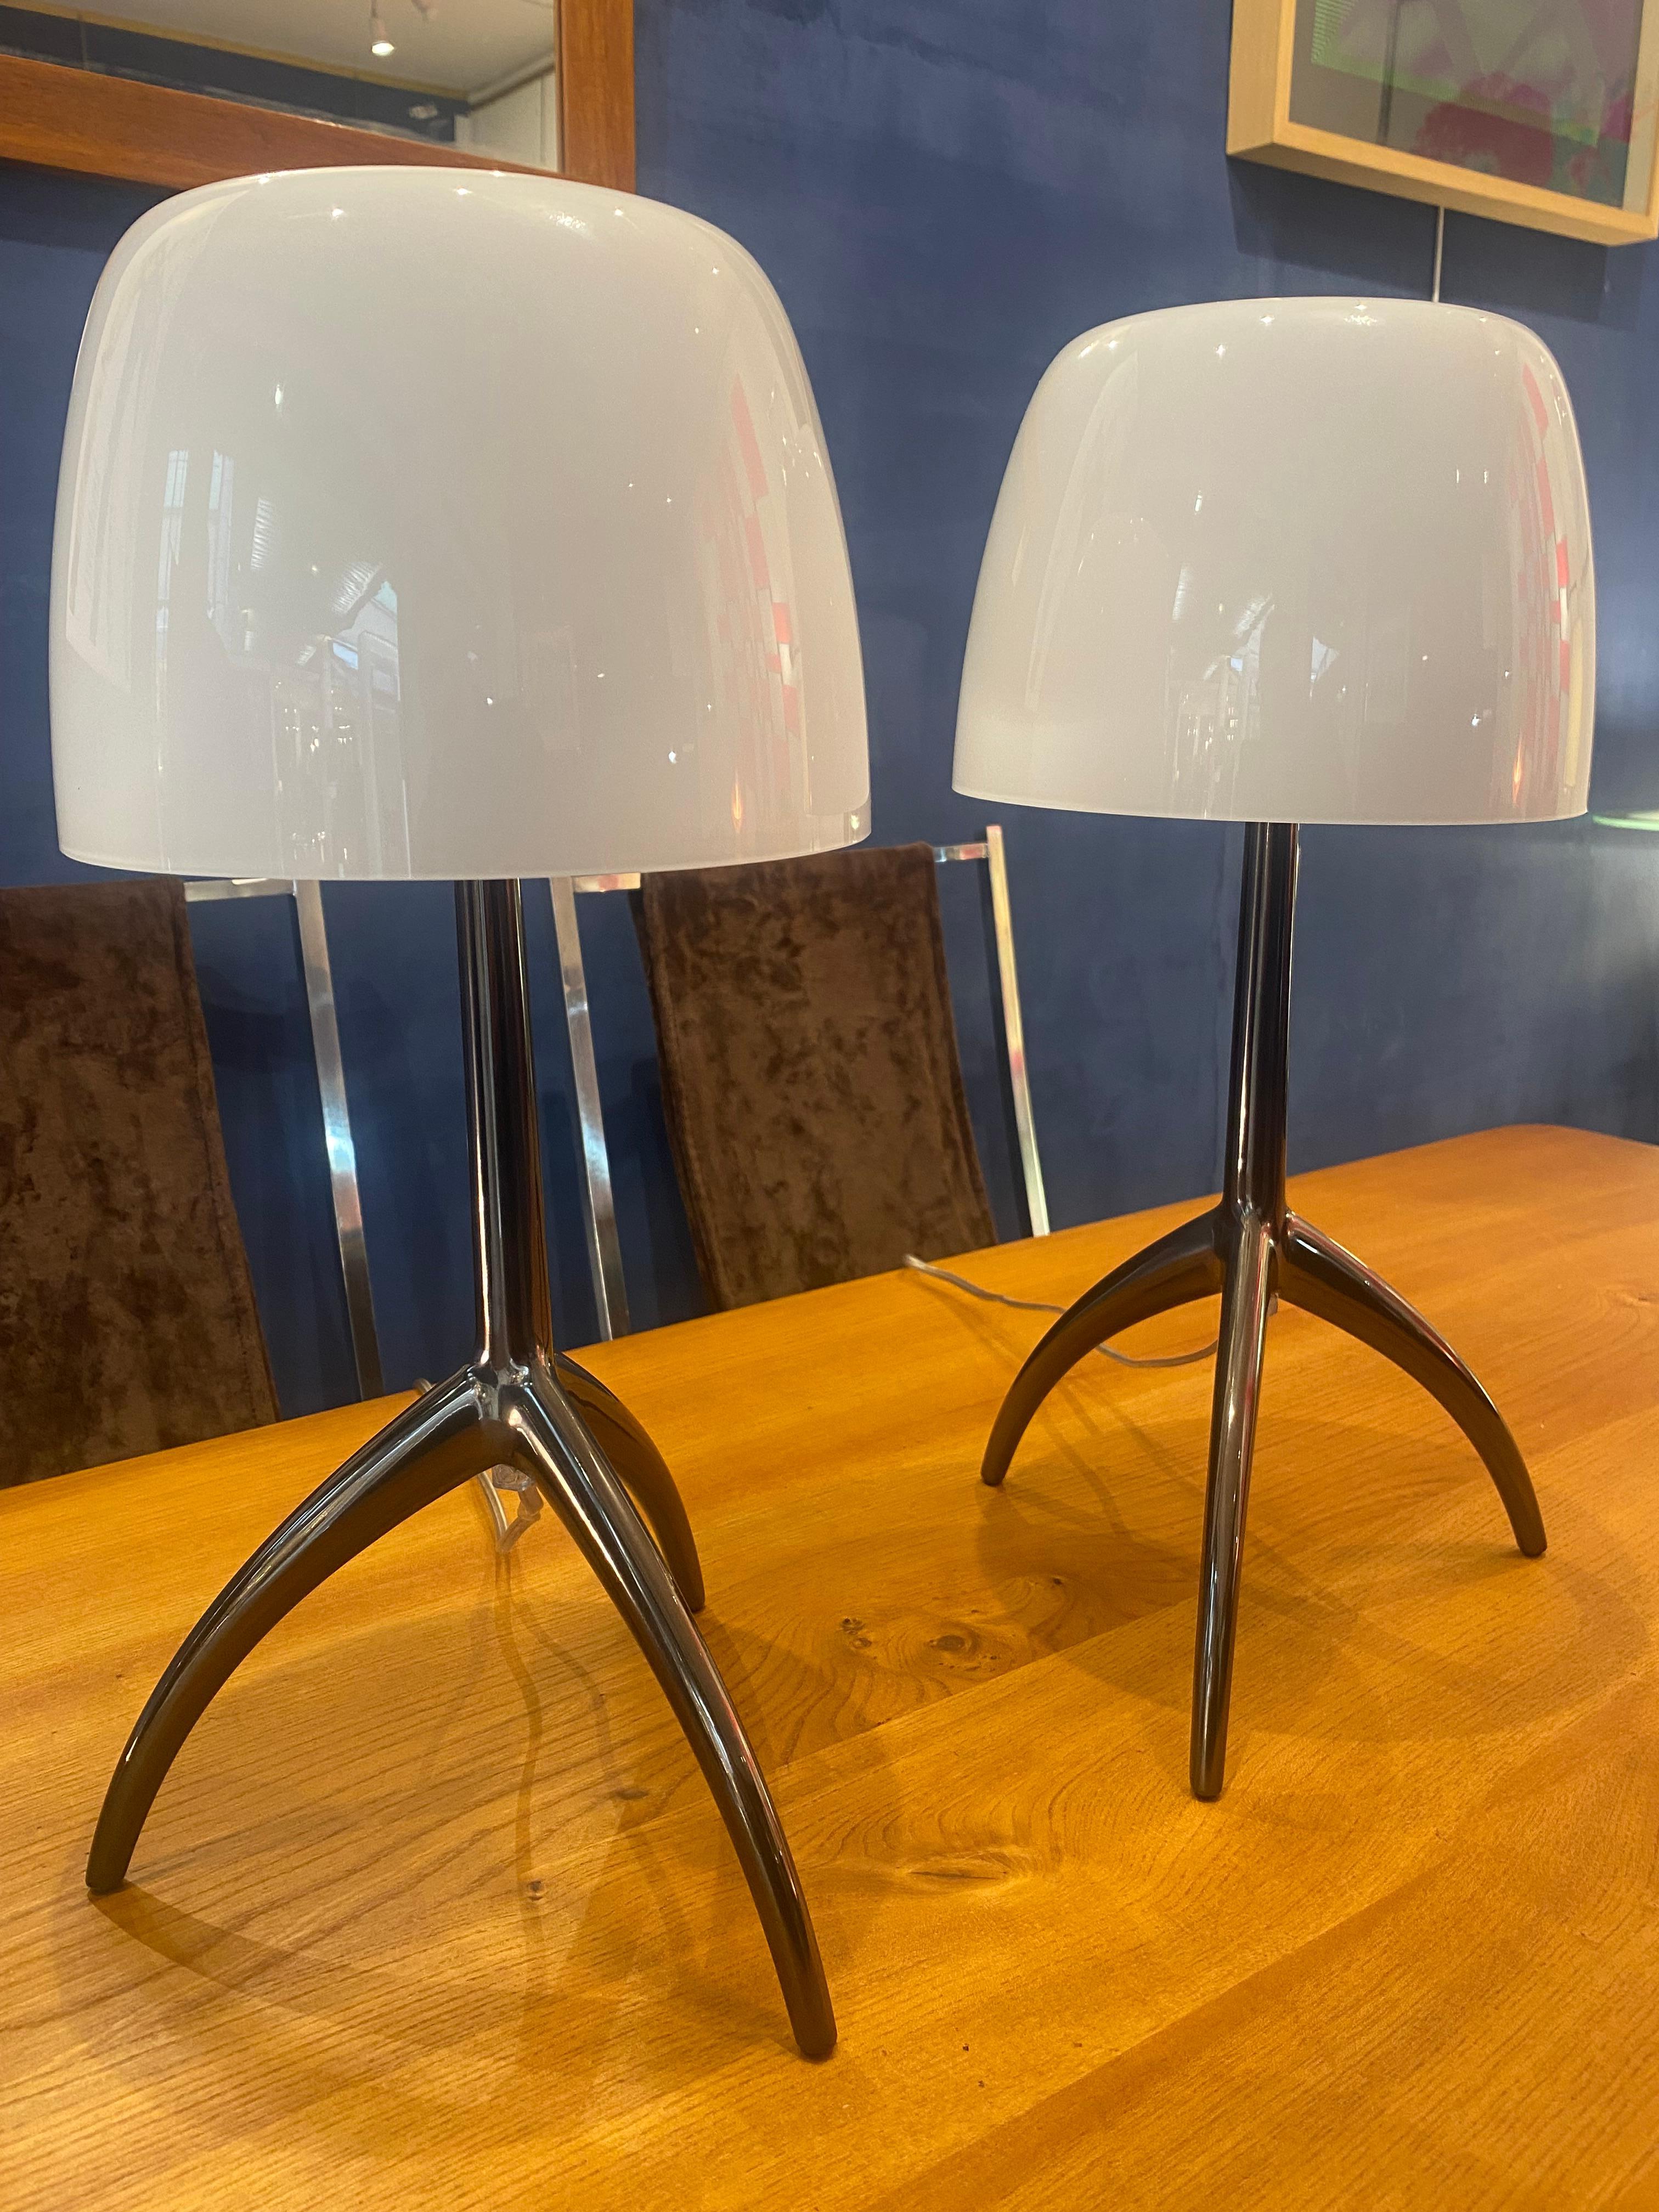 Pair of Foscarini “Lumière” model lamps
White blown glass and aluminum legs structure
H 45 x 26 in diameter
New
In perfect condition